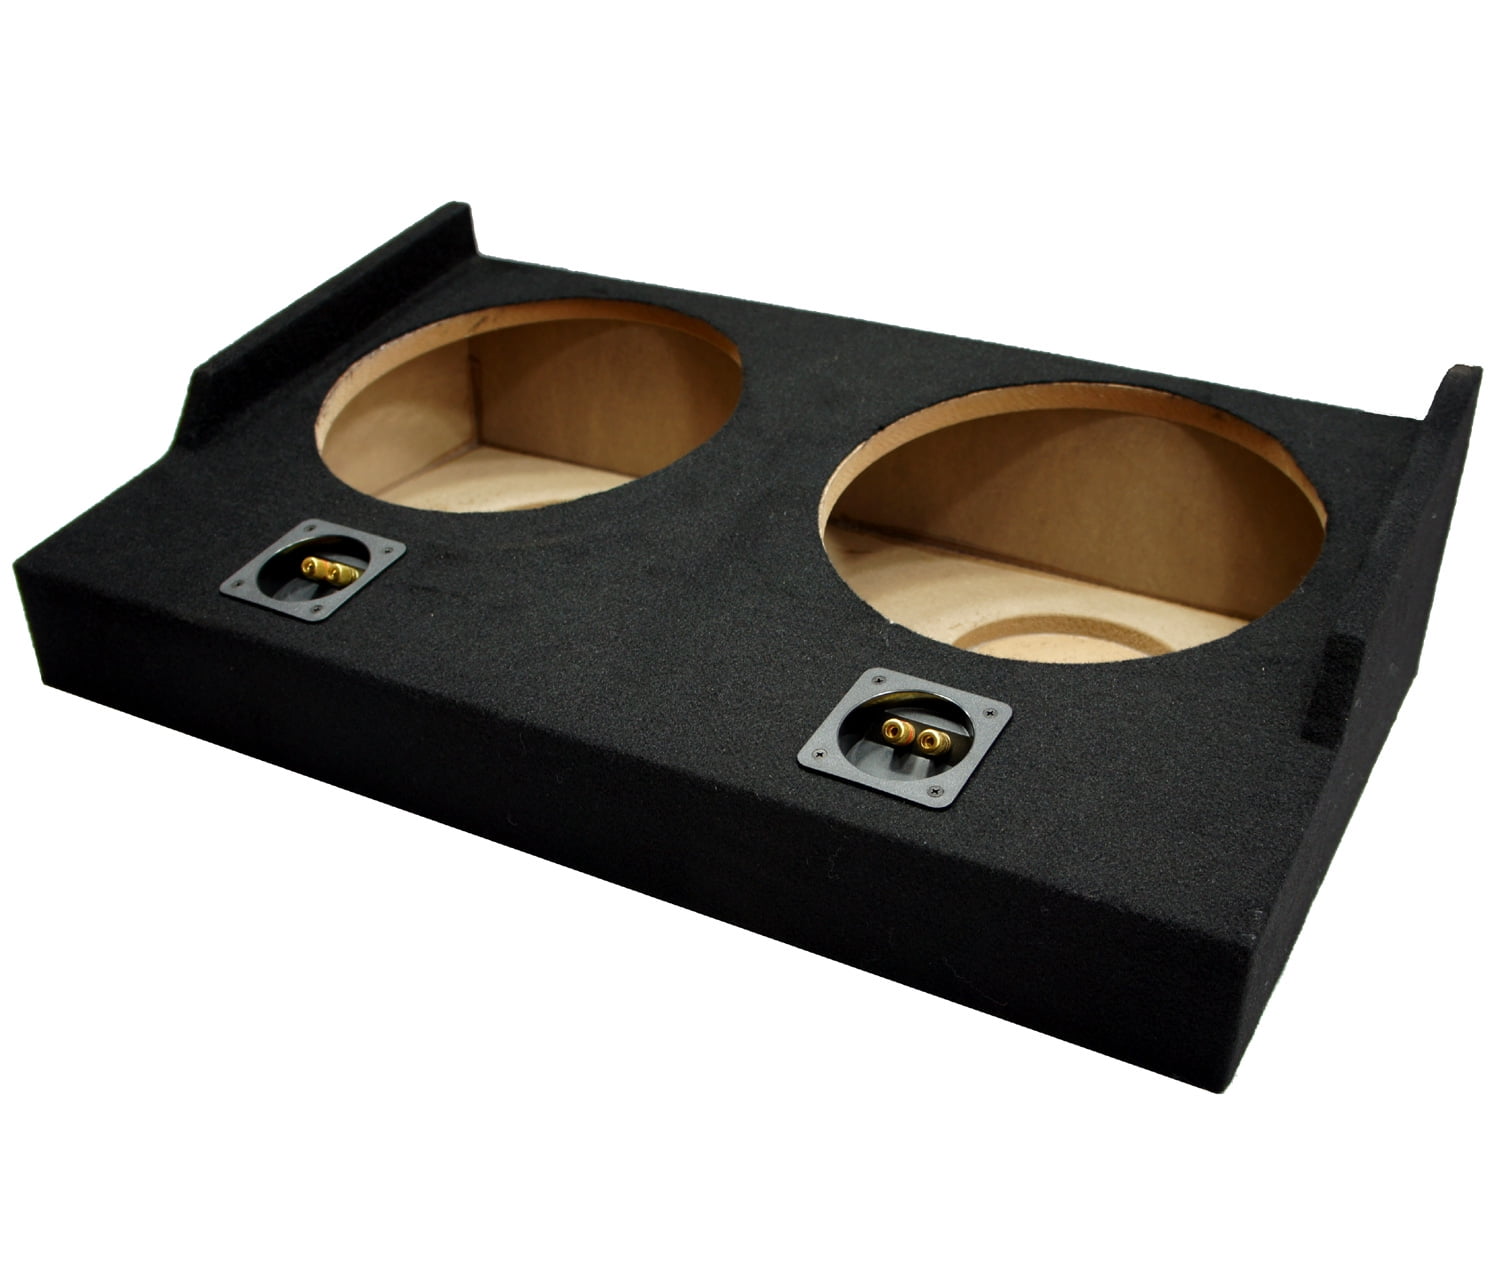 UP Ford F-150 Super Cab EXT Truck Dual 10 Sub Box Subwoofer Enclosure Compatible with 2015 